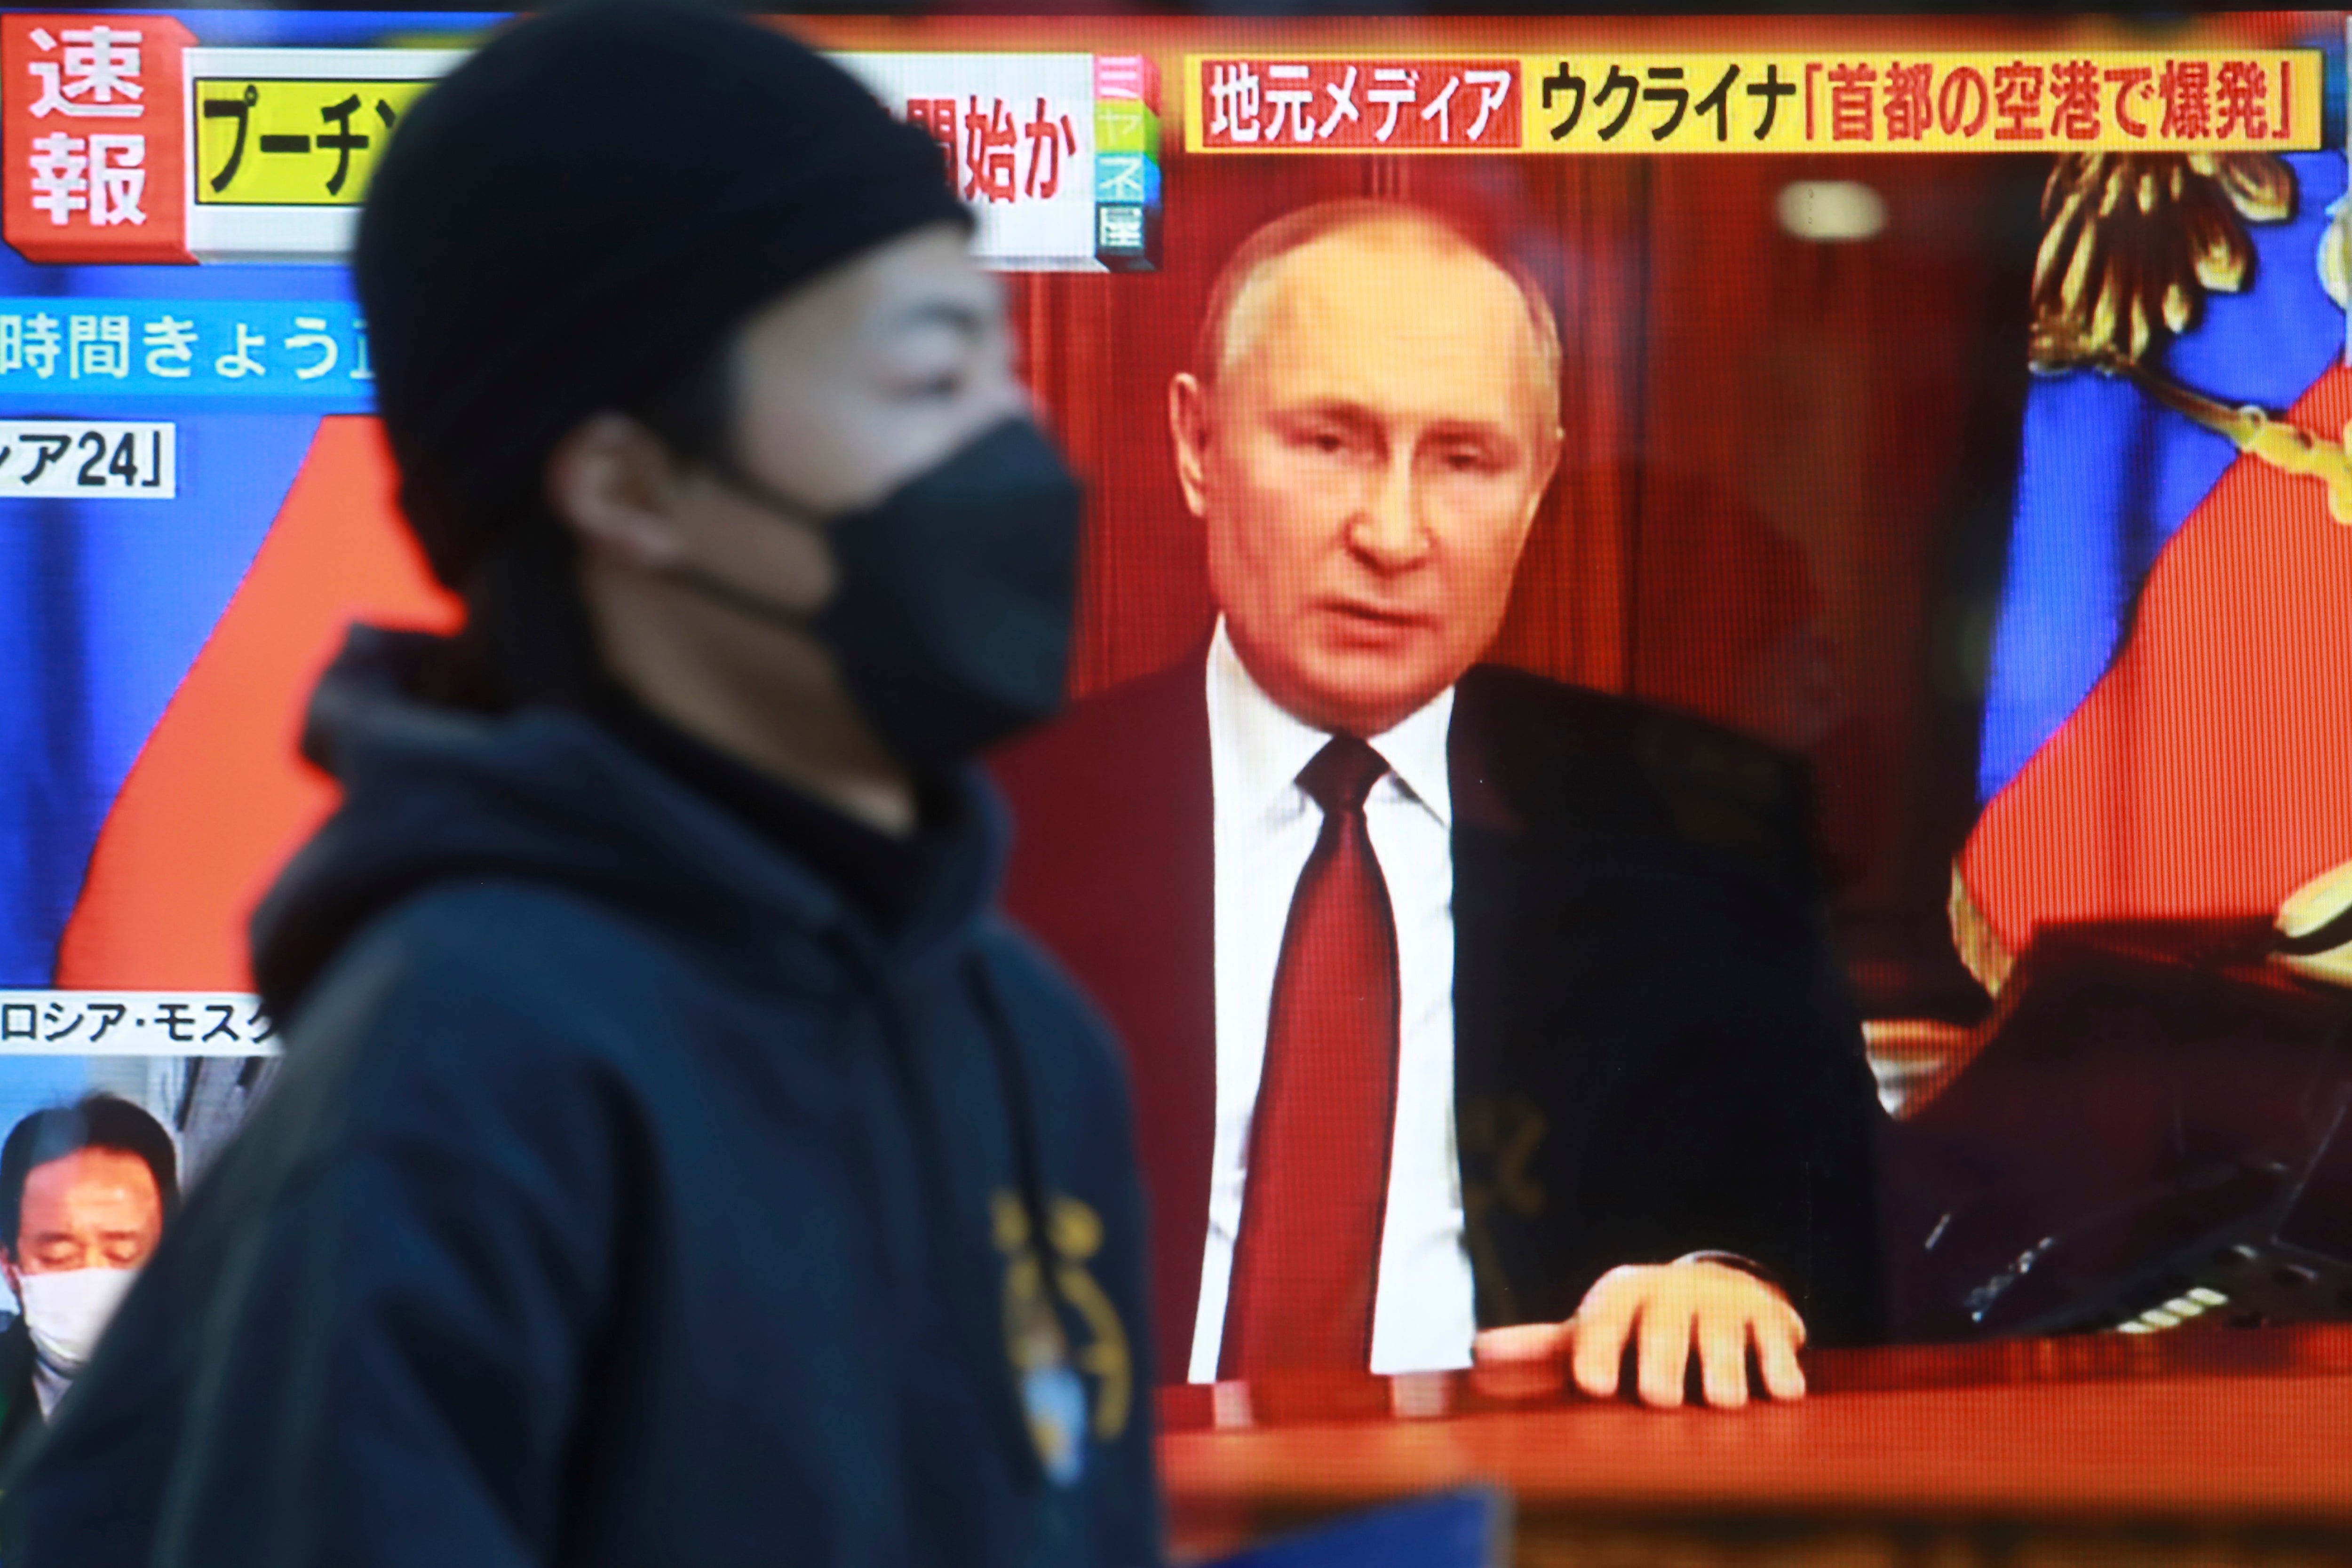 File A man walks past a TV screen with image of Russia’s President Vladimir Putin in Tokyo, Thursday, 24 Feb, 2022.